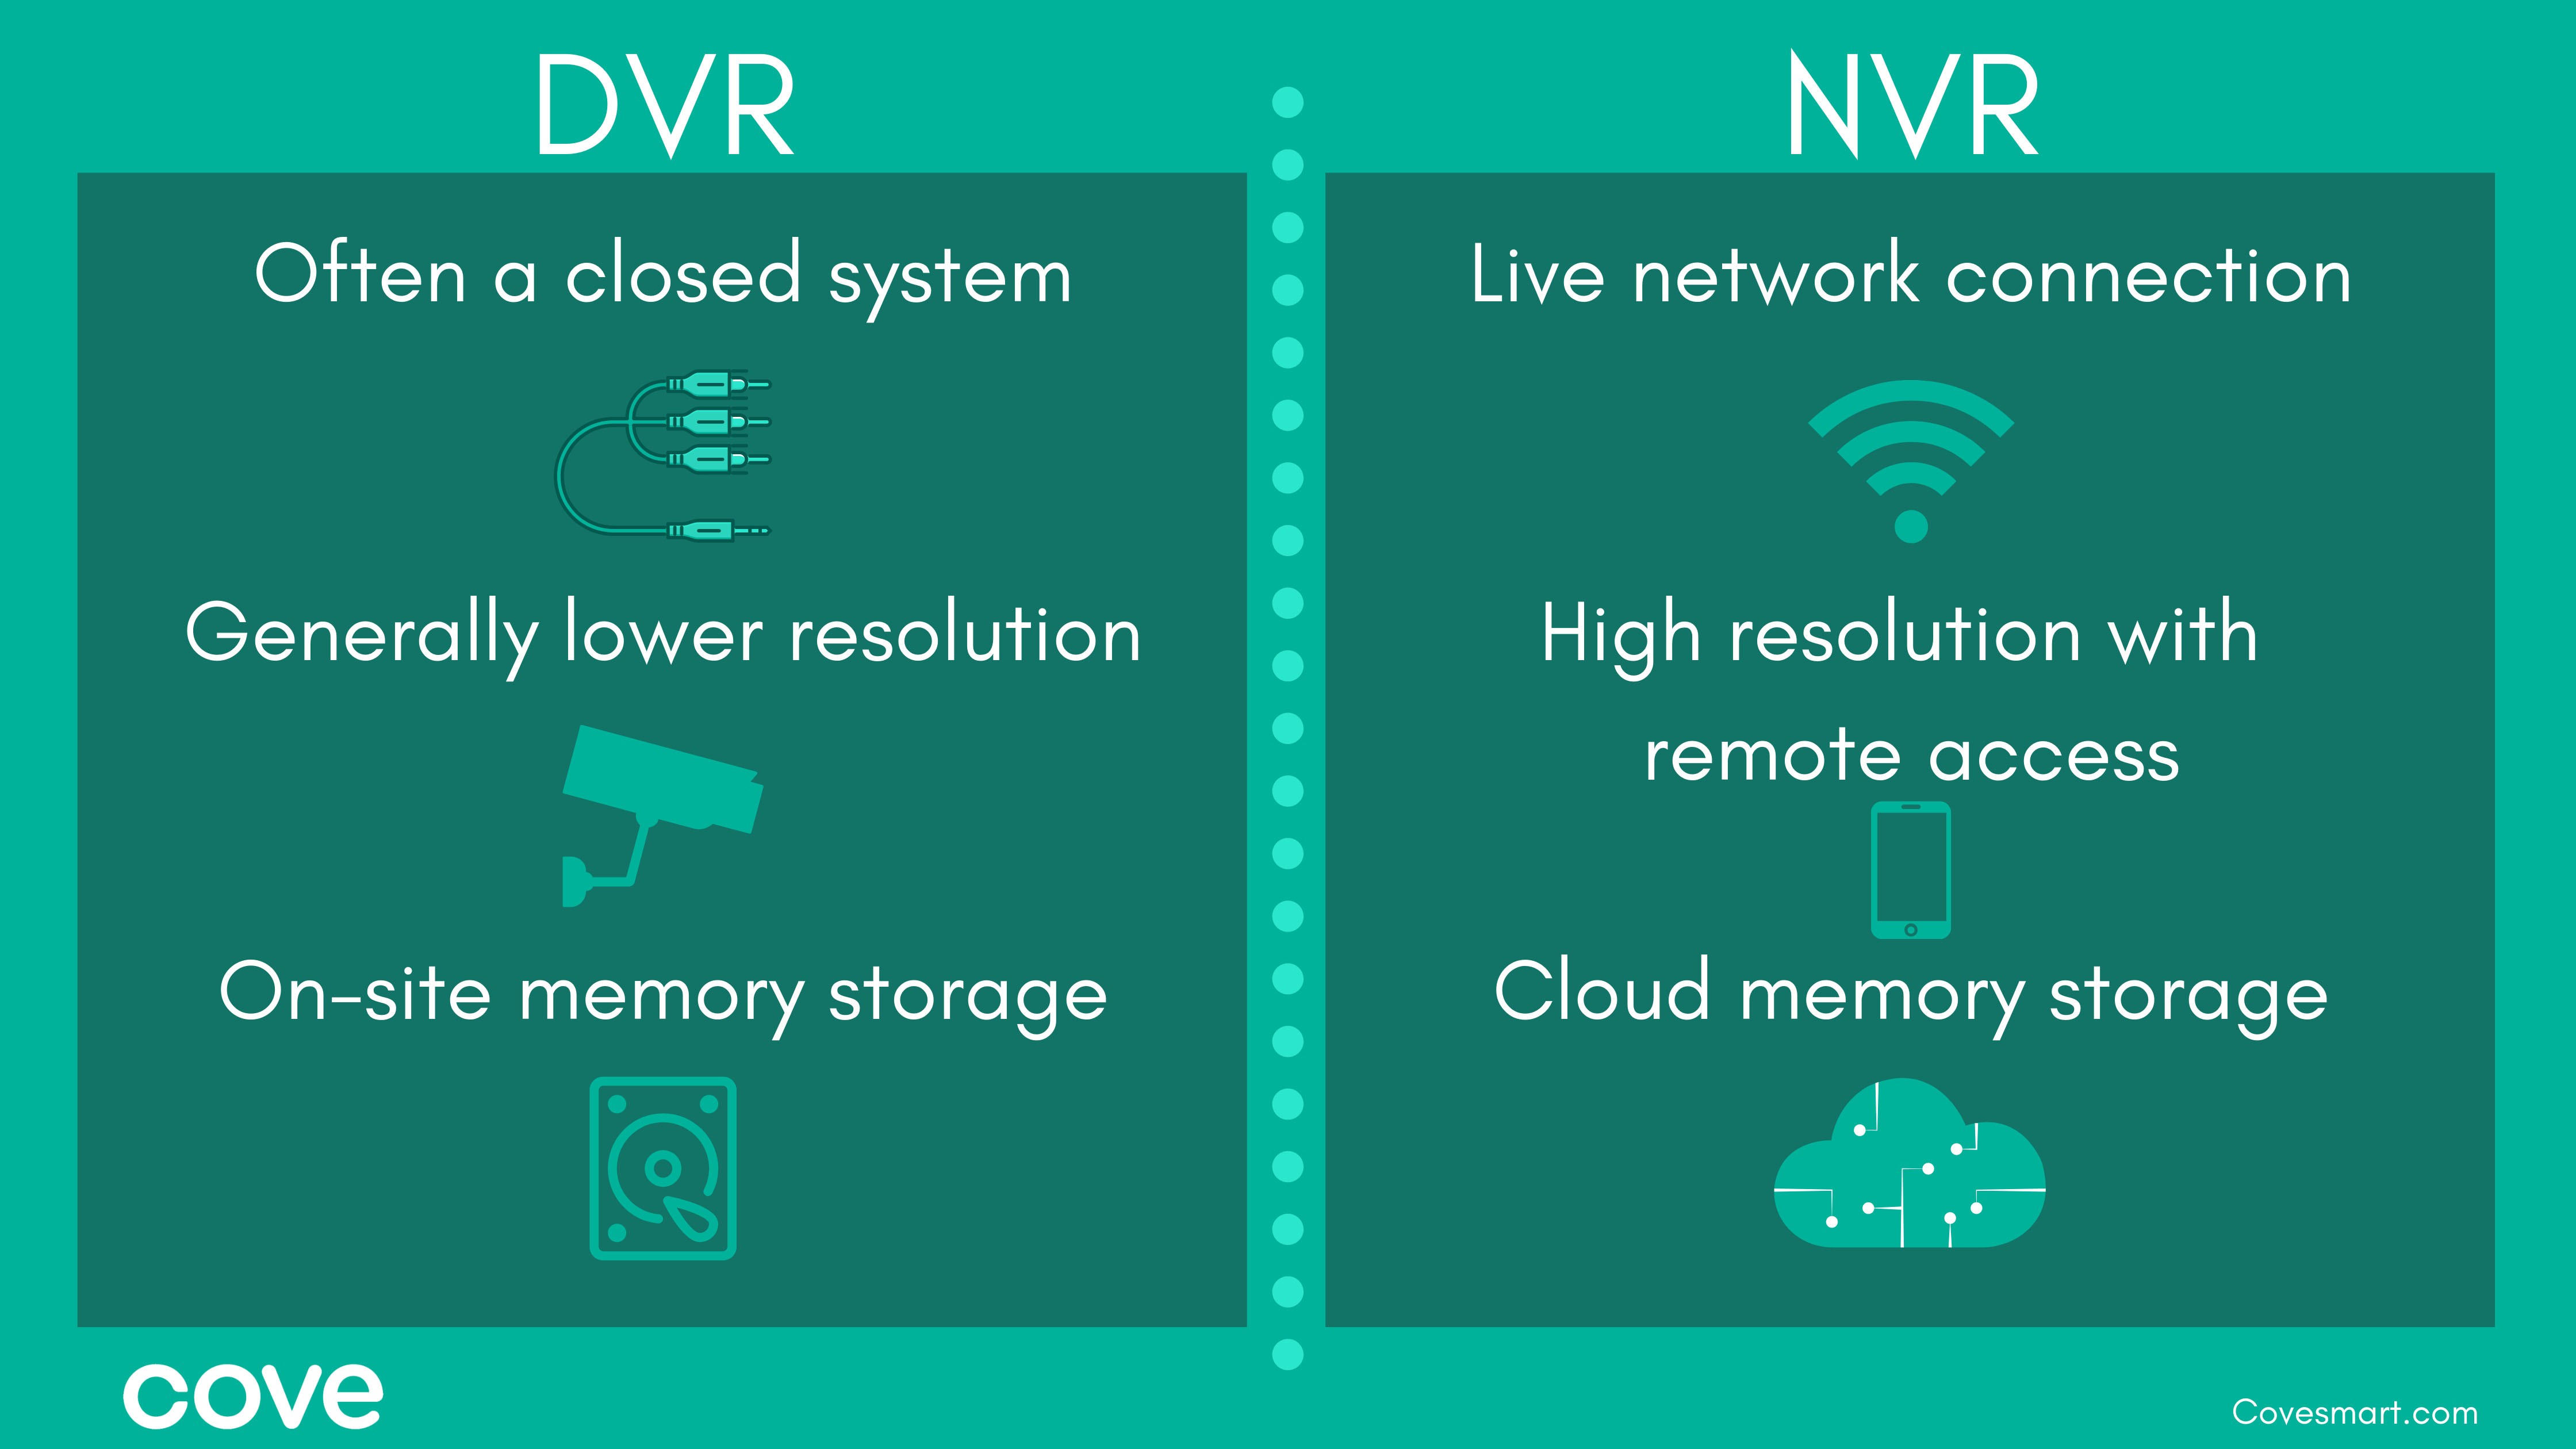 Infographic: The main differences between an NVR and DVR security system